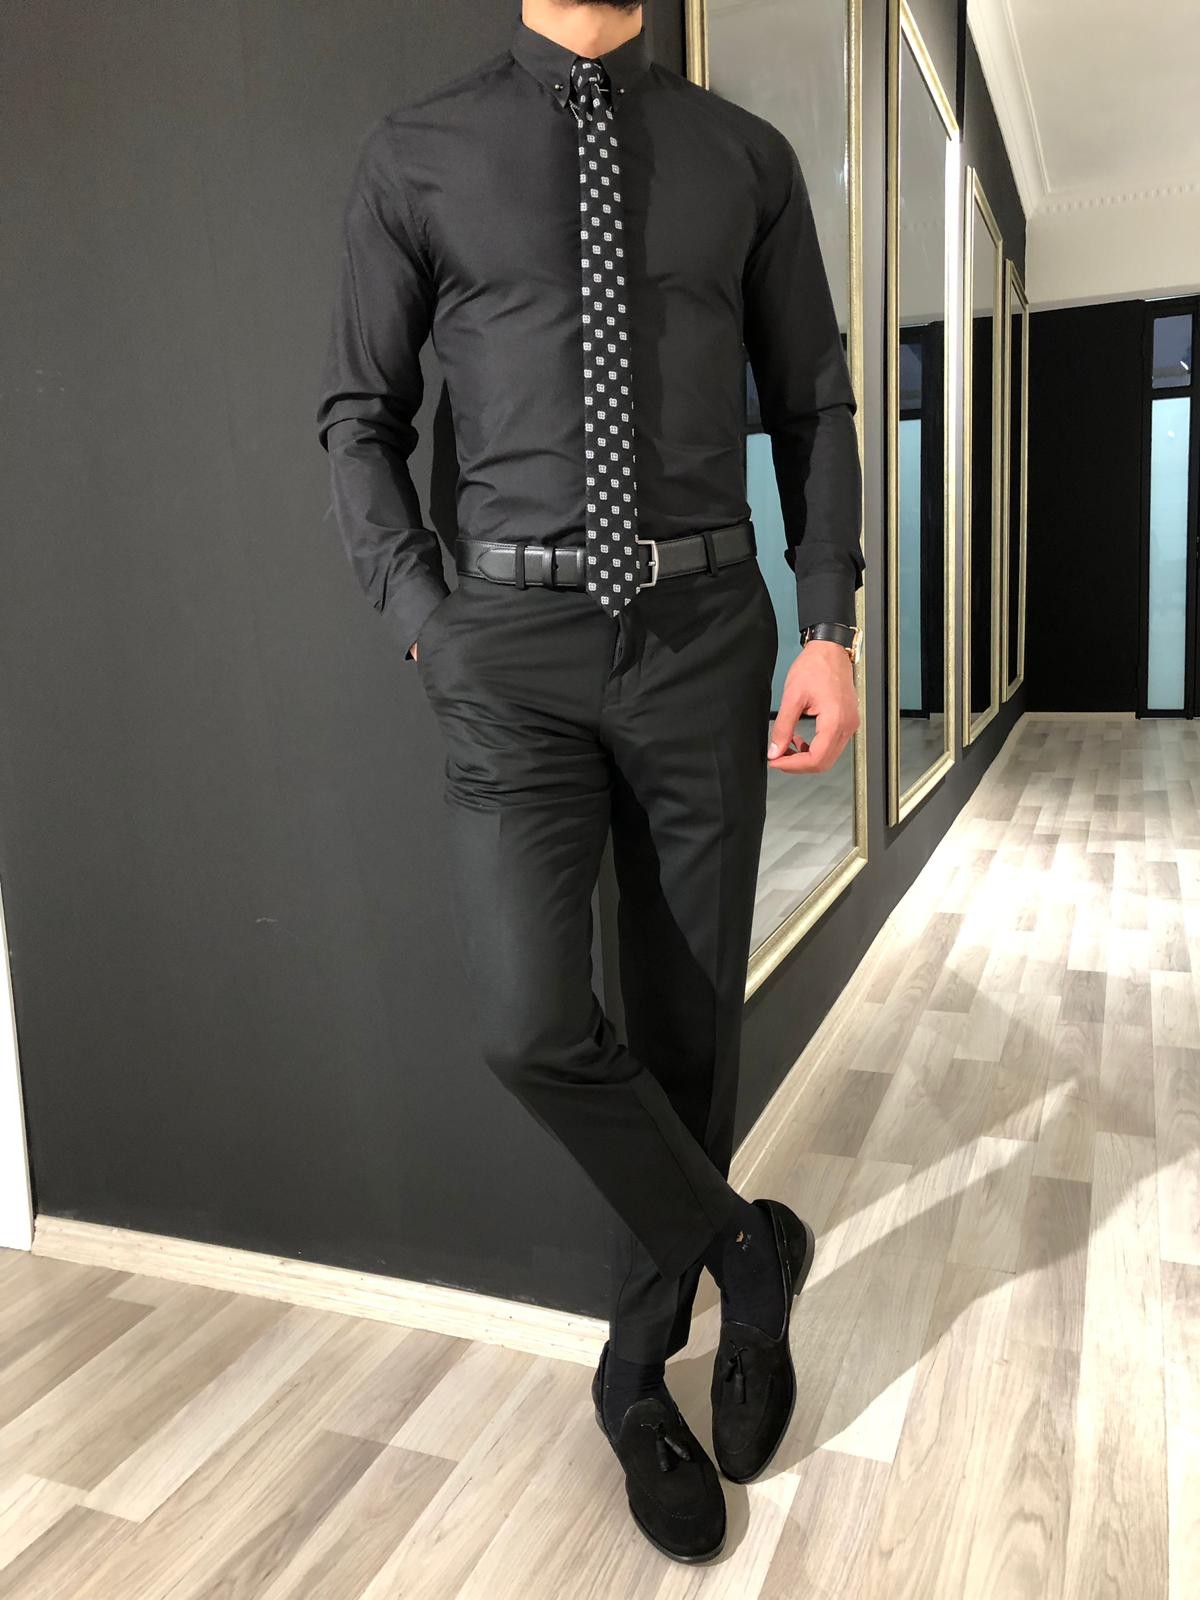 Buy Black Chain Collar Slim Fit Shirt by  with Free